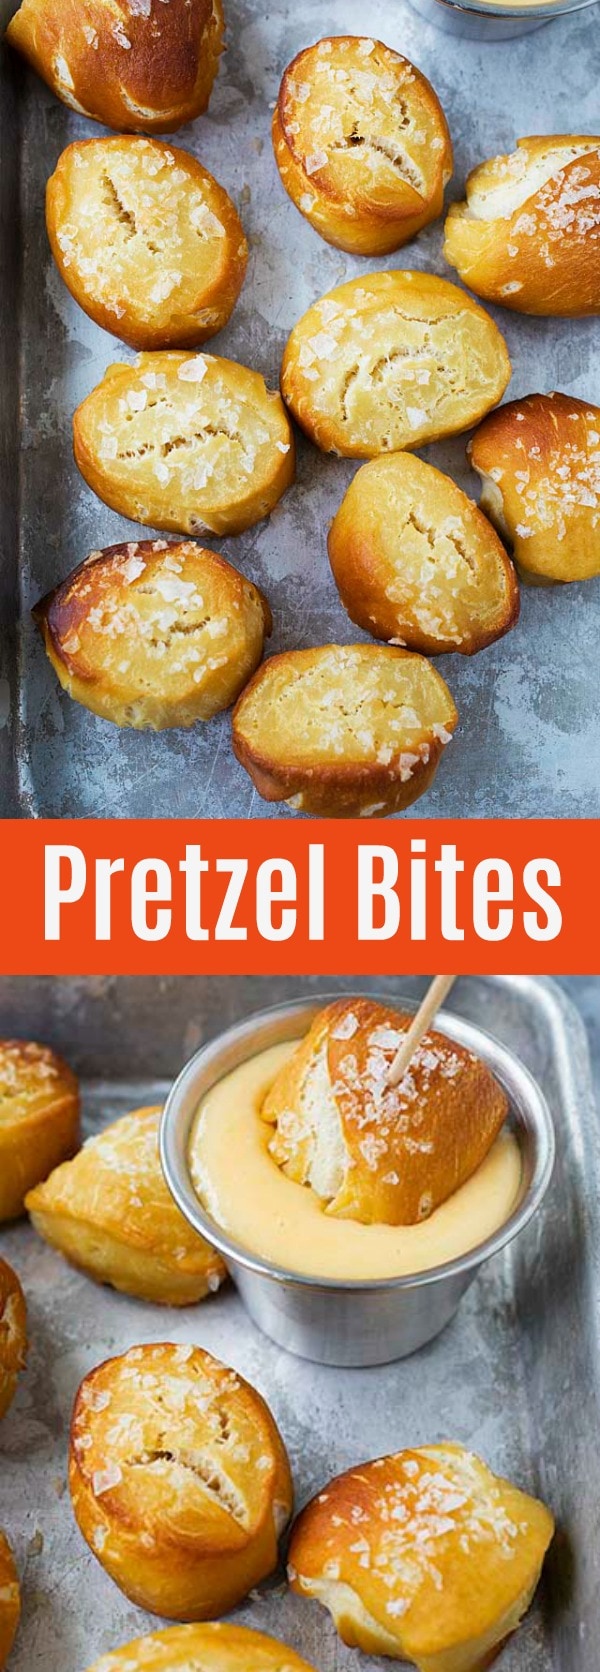 Easy Pretzel Bites - soft and delicious homemade pretzel bites that you can't stop eating. Serve them with cheddar cheese sauce. A perfect snack any time of the day!